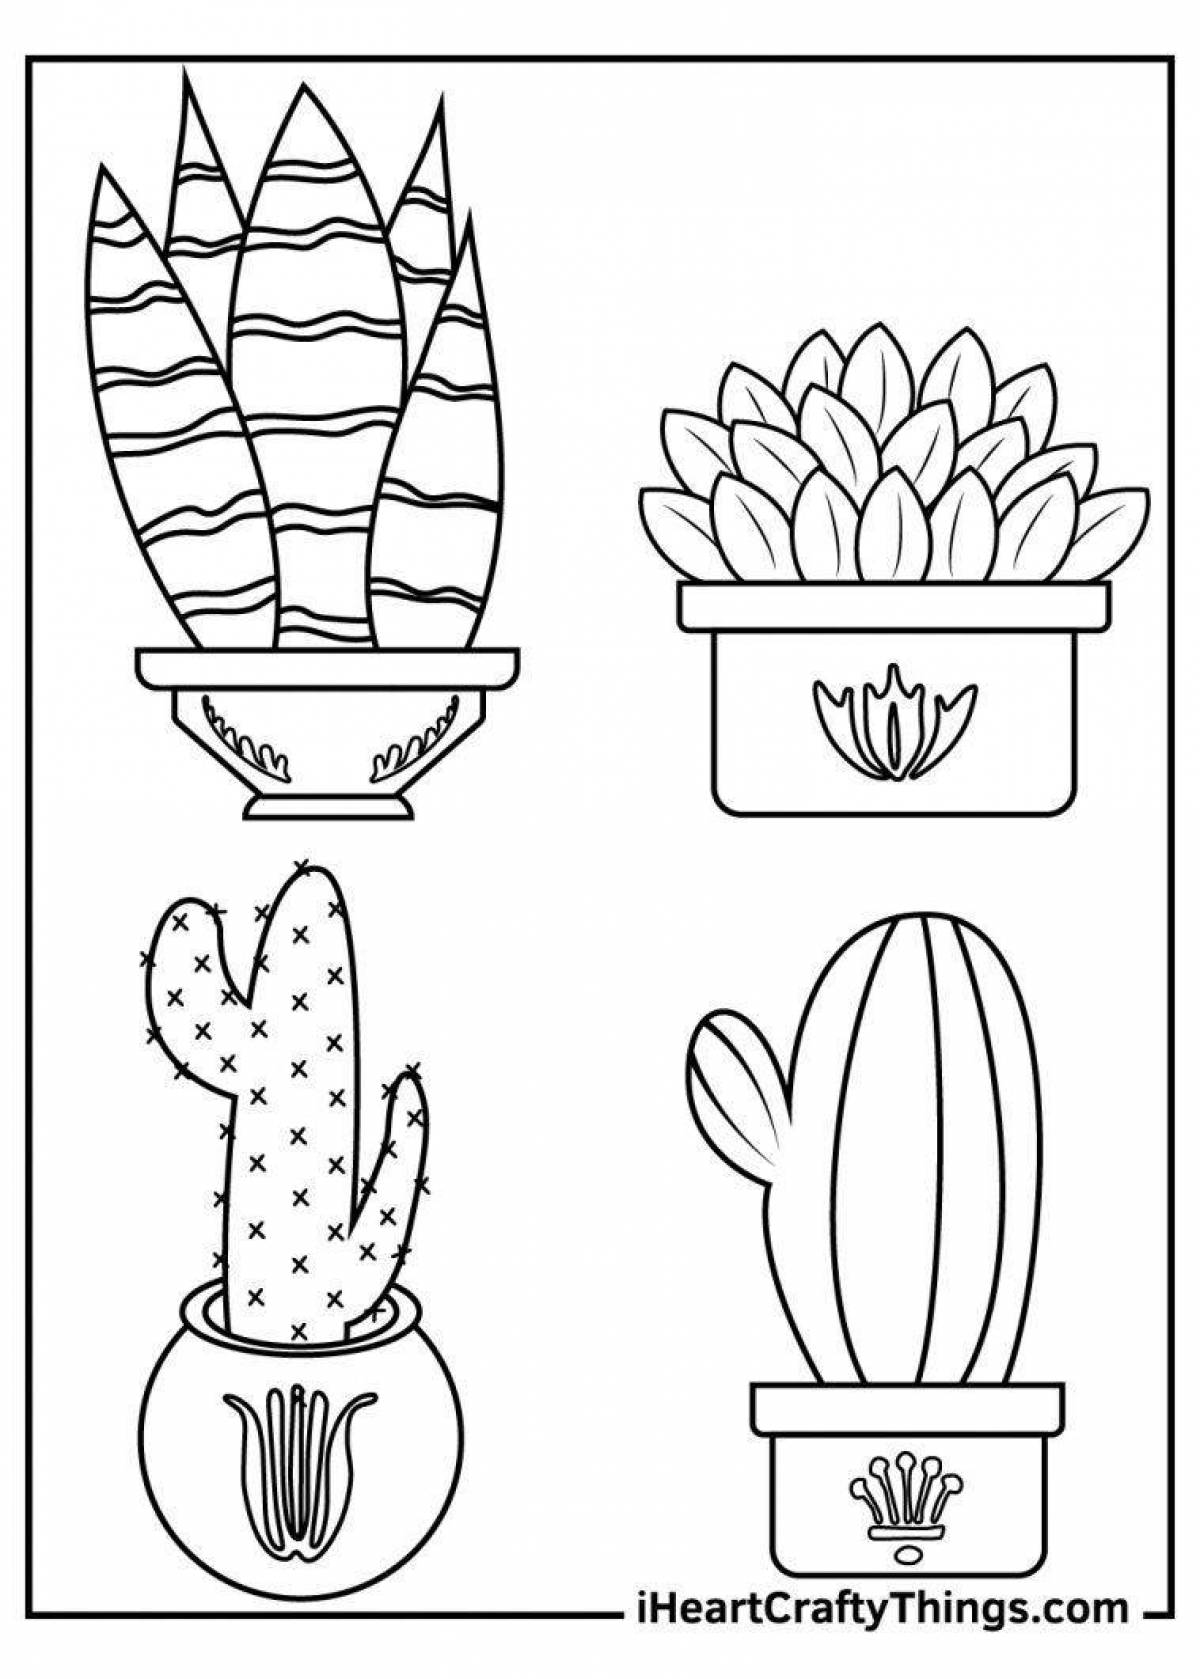 Playful houseplants coloring page for 6-7 year olds